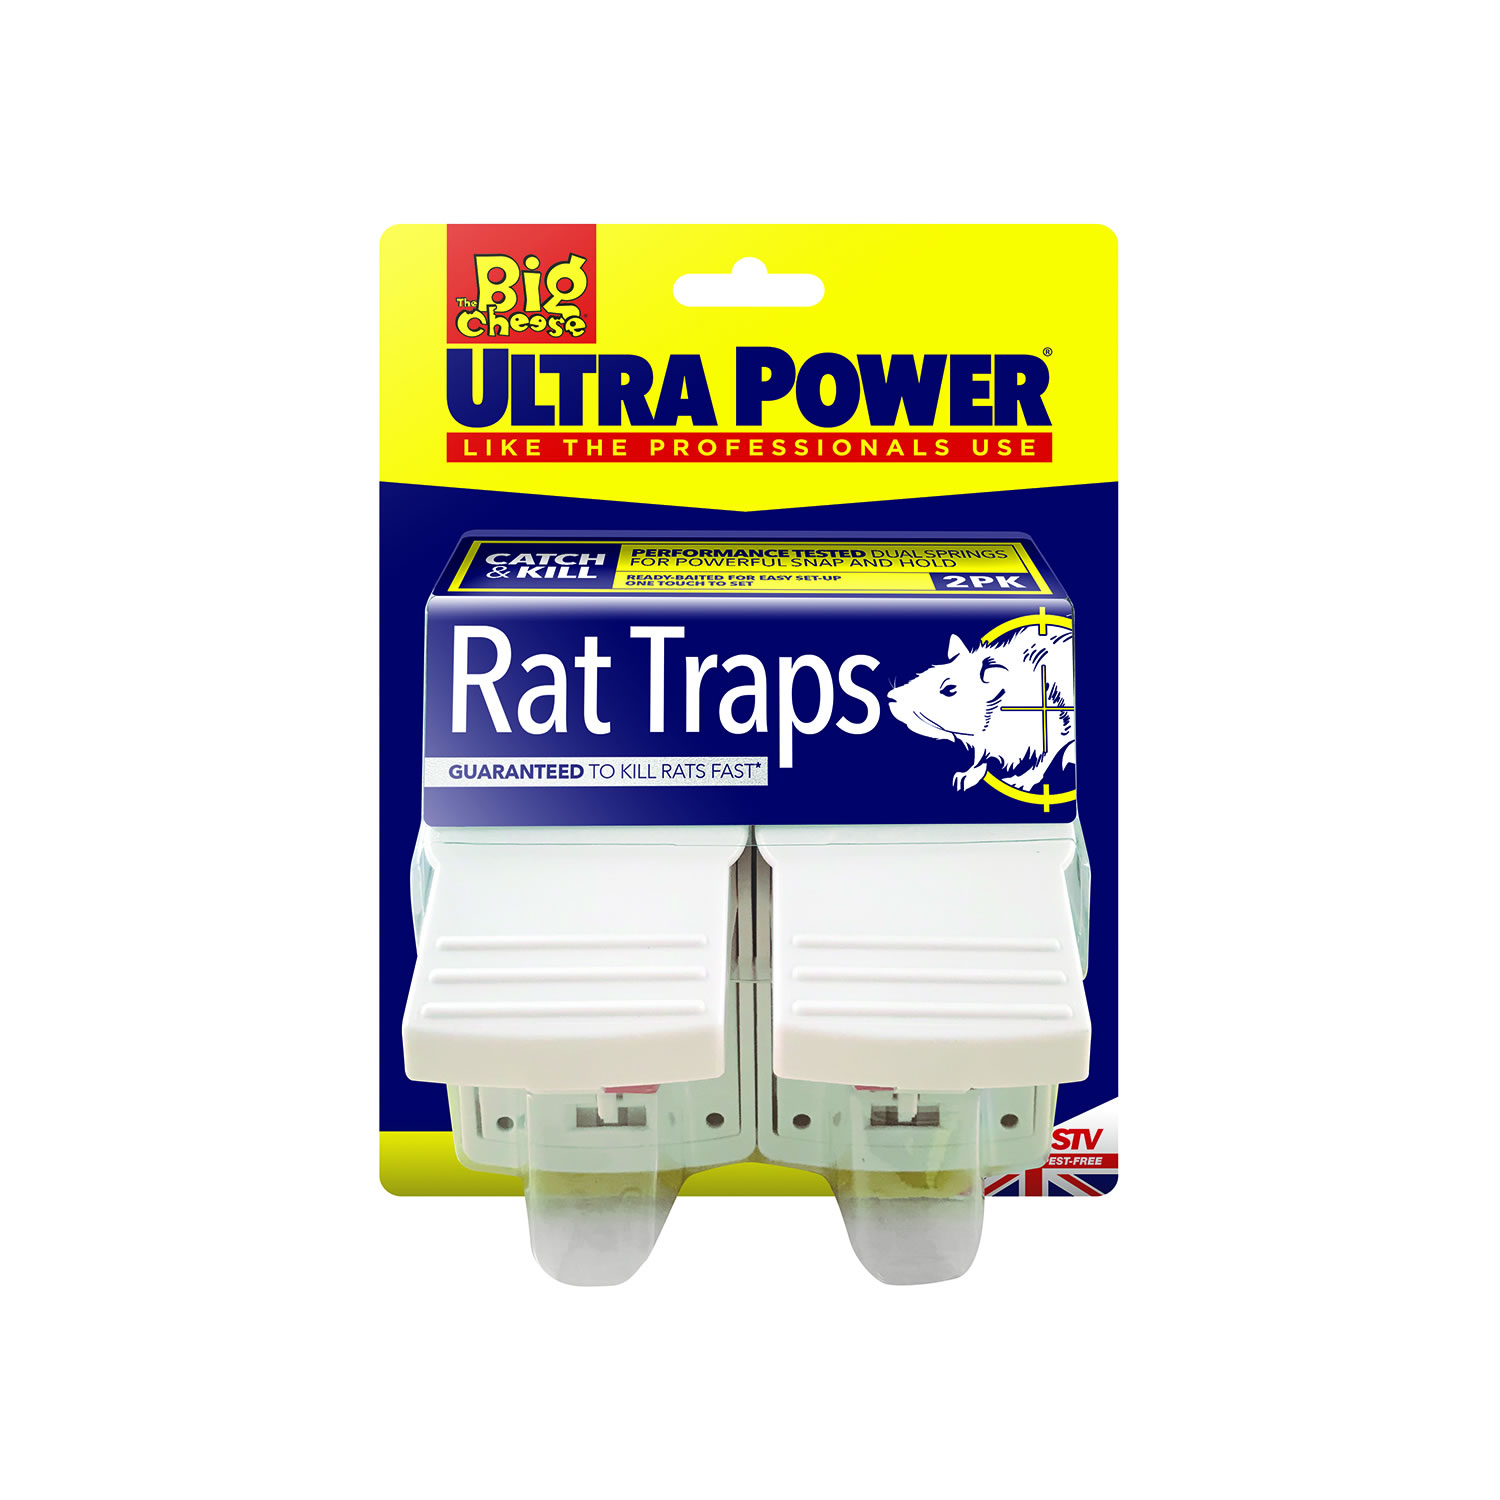 THE BIG CHEESE ULTRA POWER RAT TRAP TWIN PACK